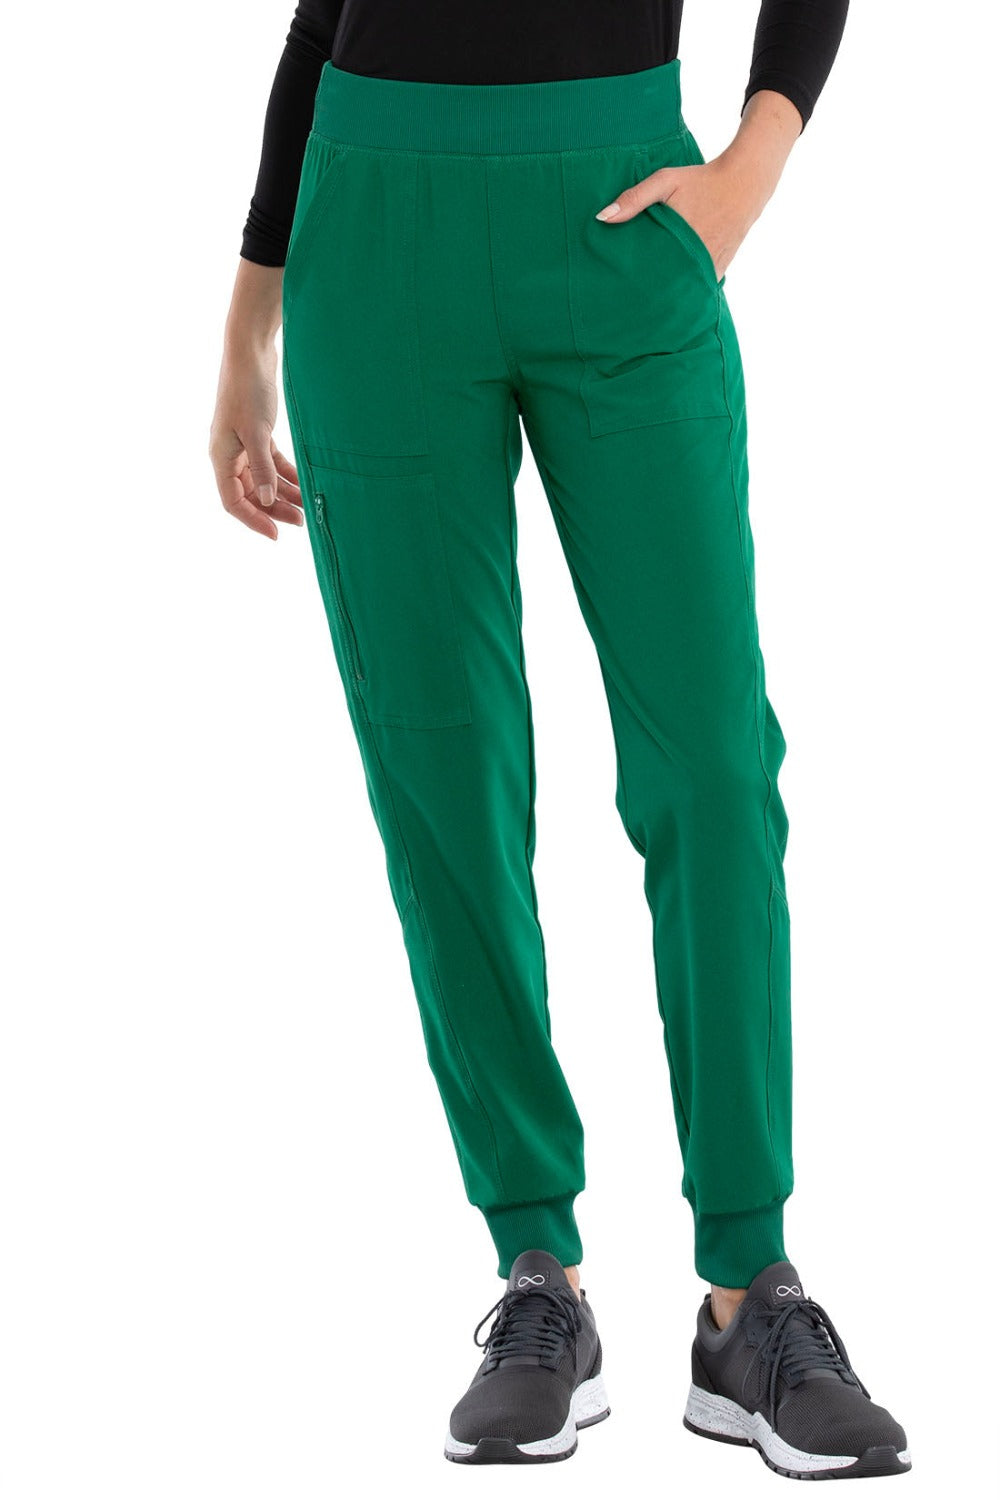 Cherokee Allura Scrub Pant Pull On Jogger in Hunter at Parker's Clothing and Shoes.